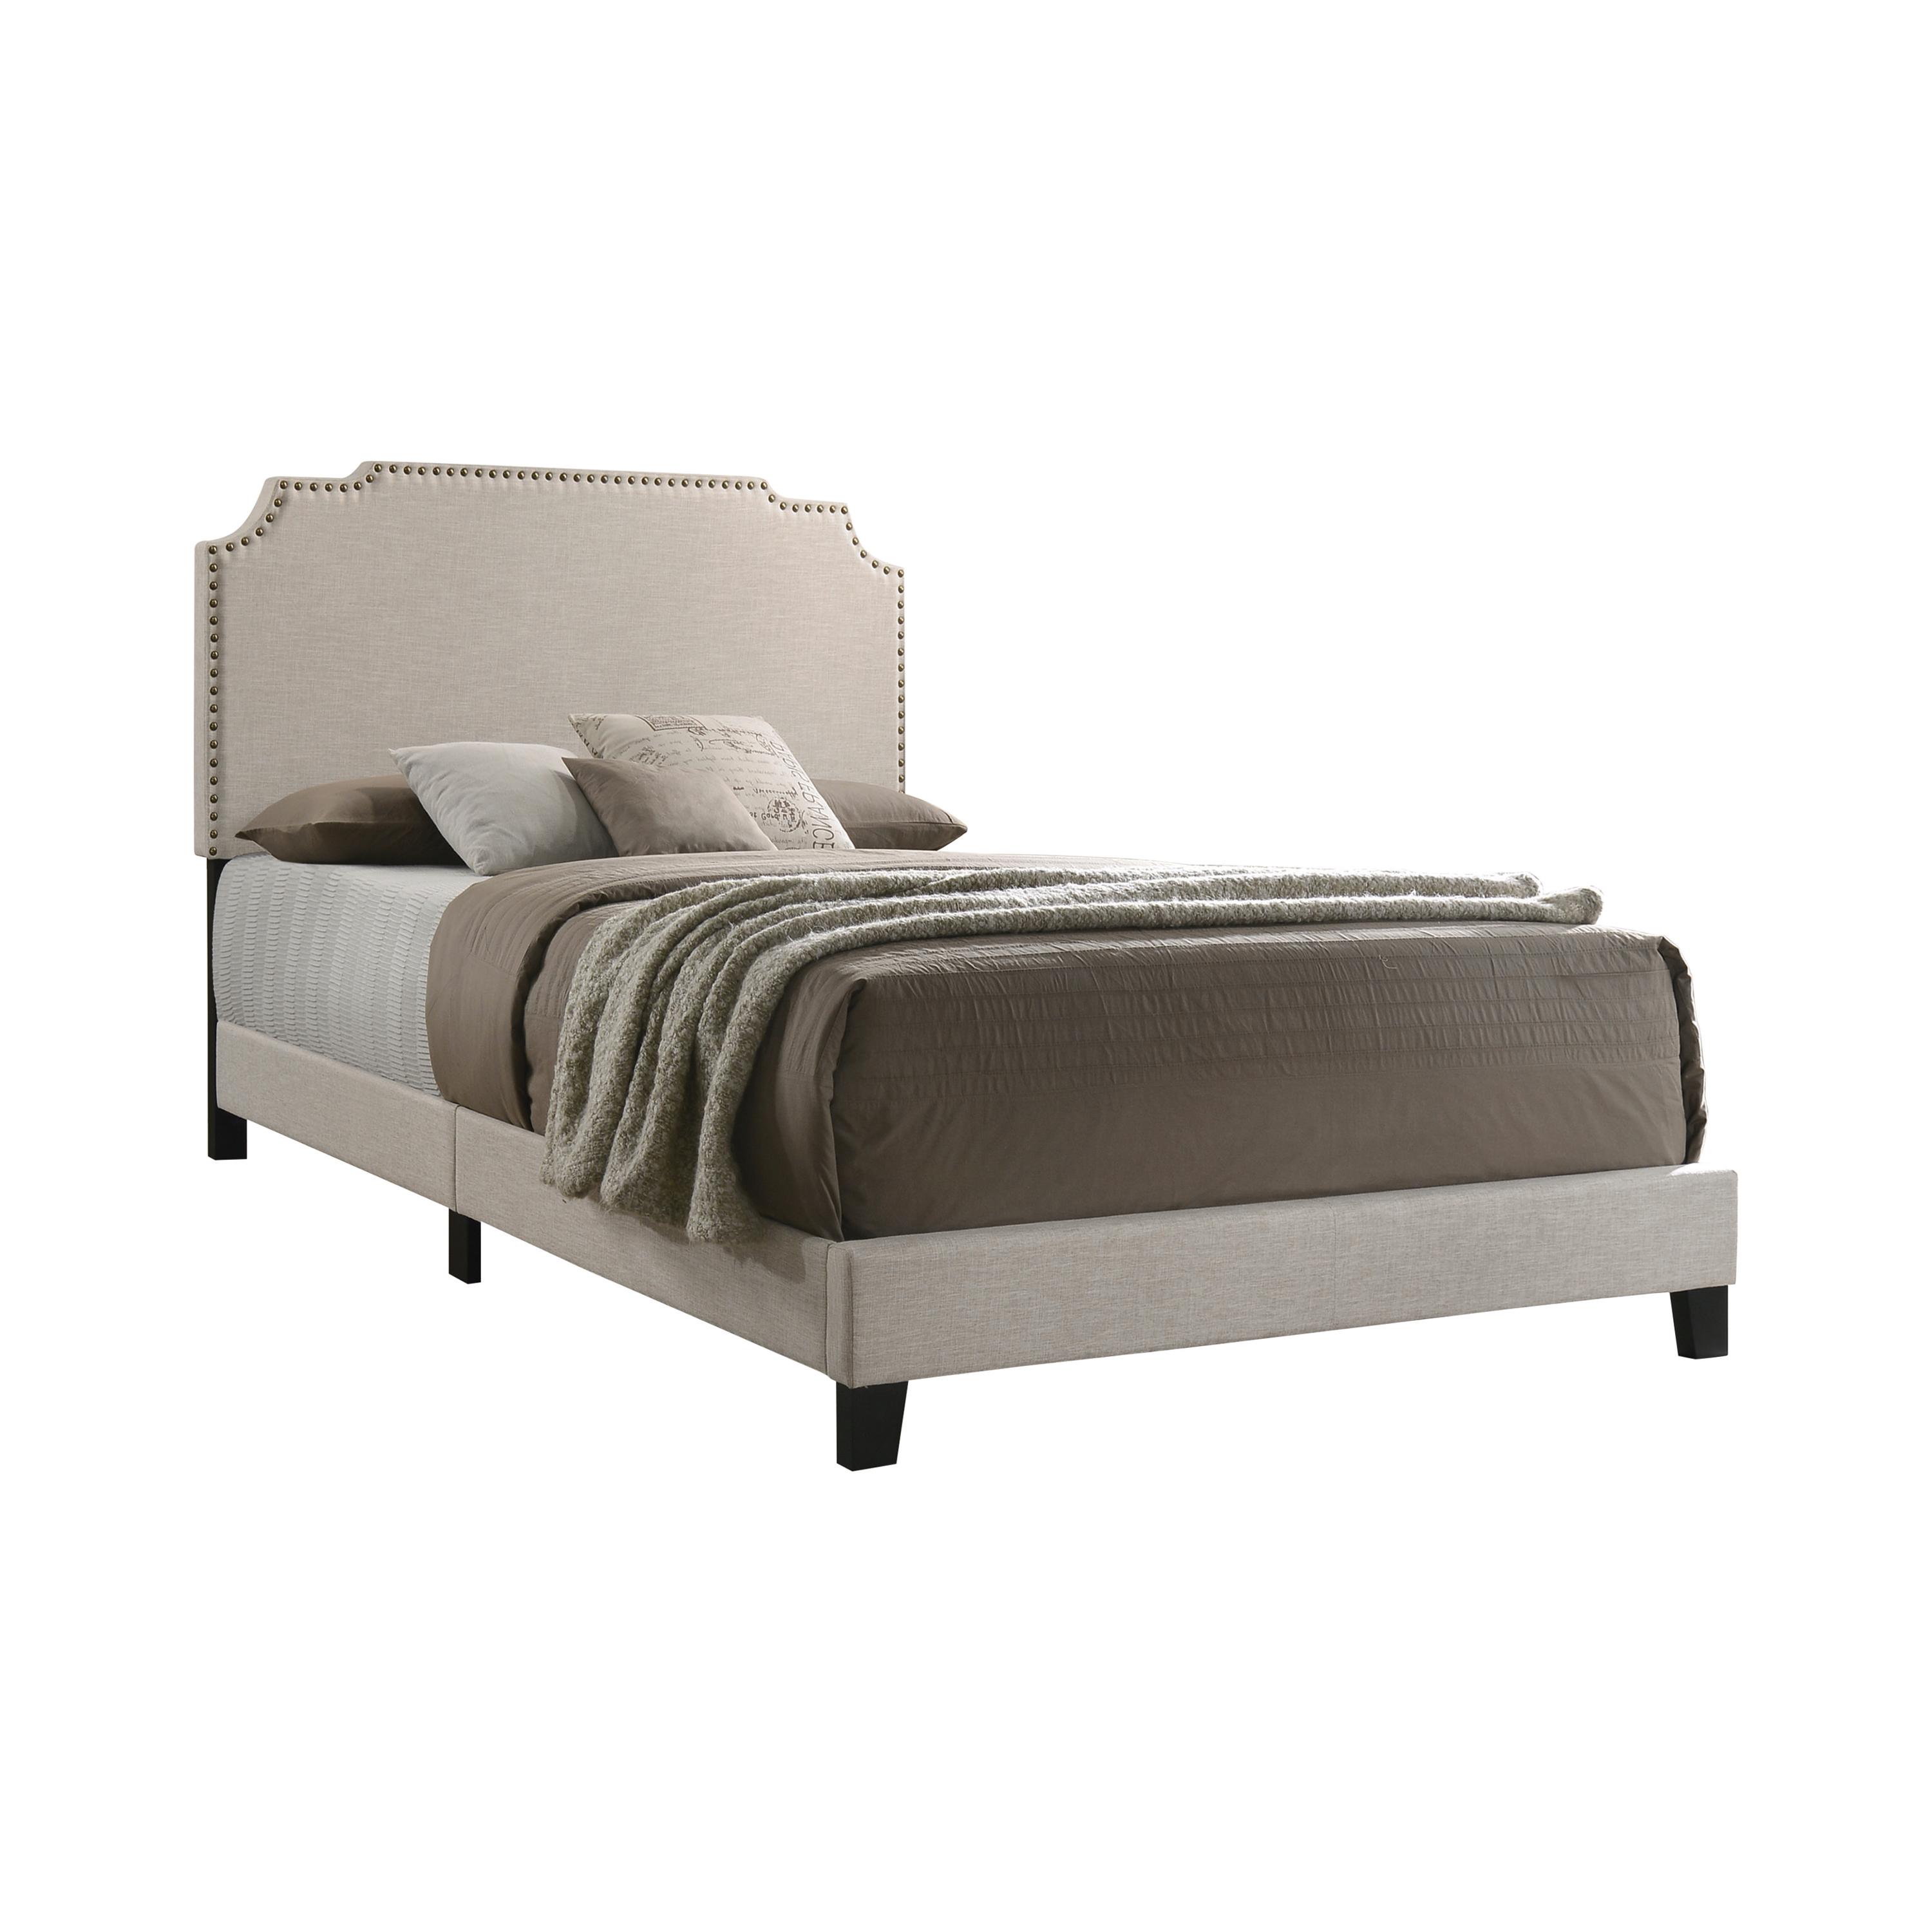 

    
Contemporary Beige Fabric Upholstery Queen Bed Coaster 310061Q Tamarac
